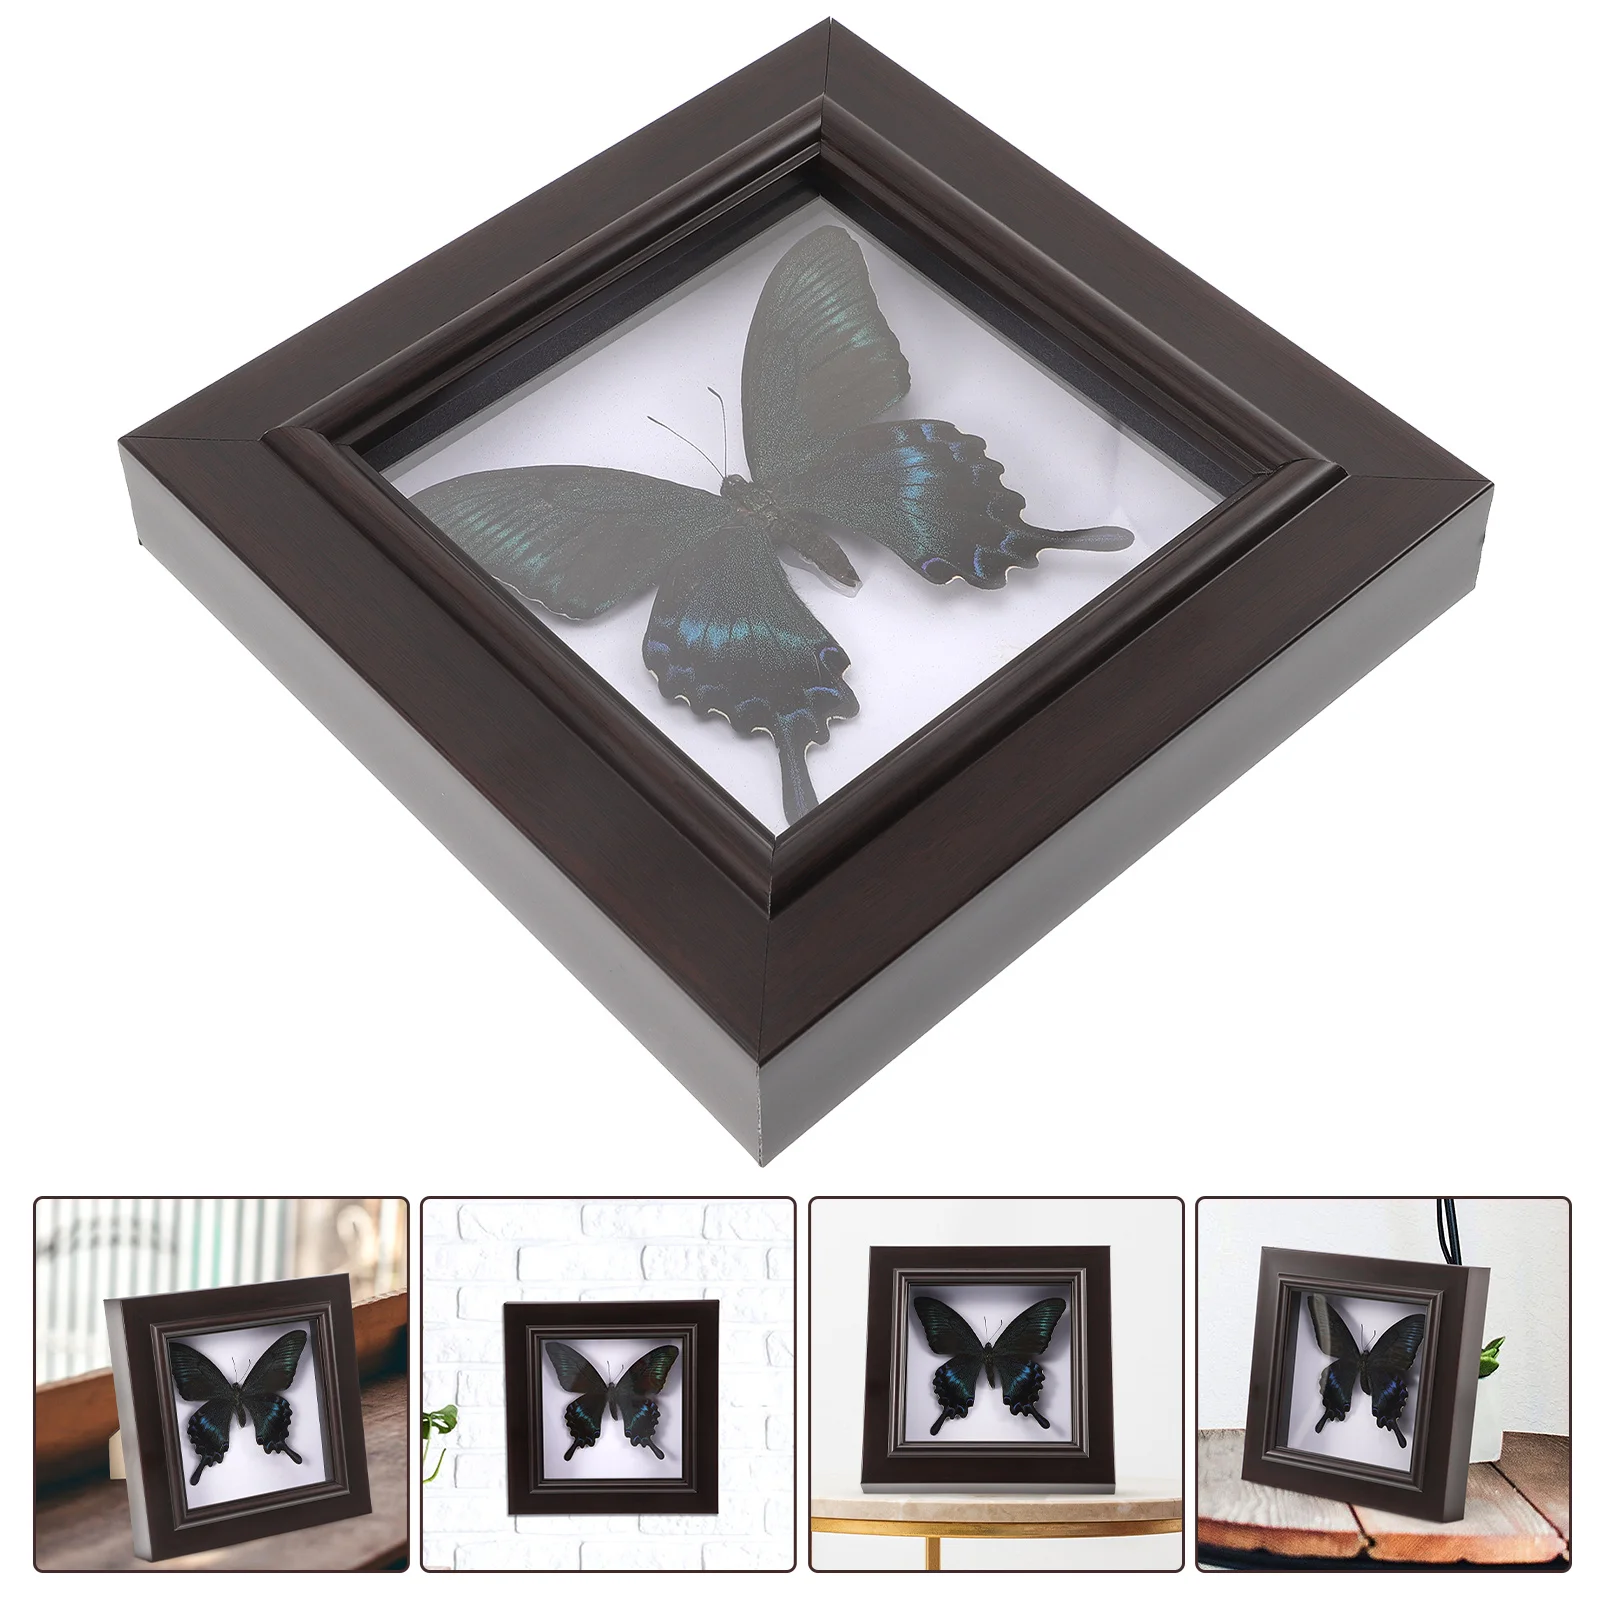 

Specimen Shadow Boxdisplay Frame Case Framed Taxidermy Preservedboxes Butterflies Faux Fake 3D Decor Wall Animals Specimens